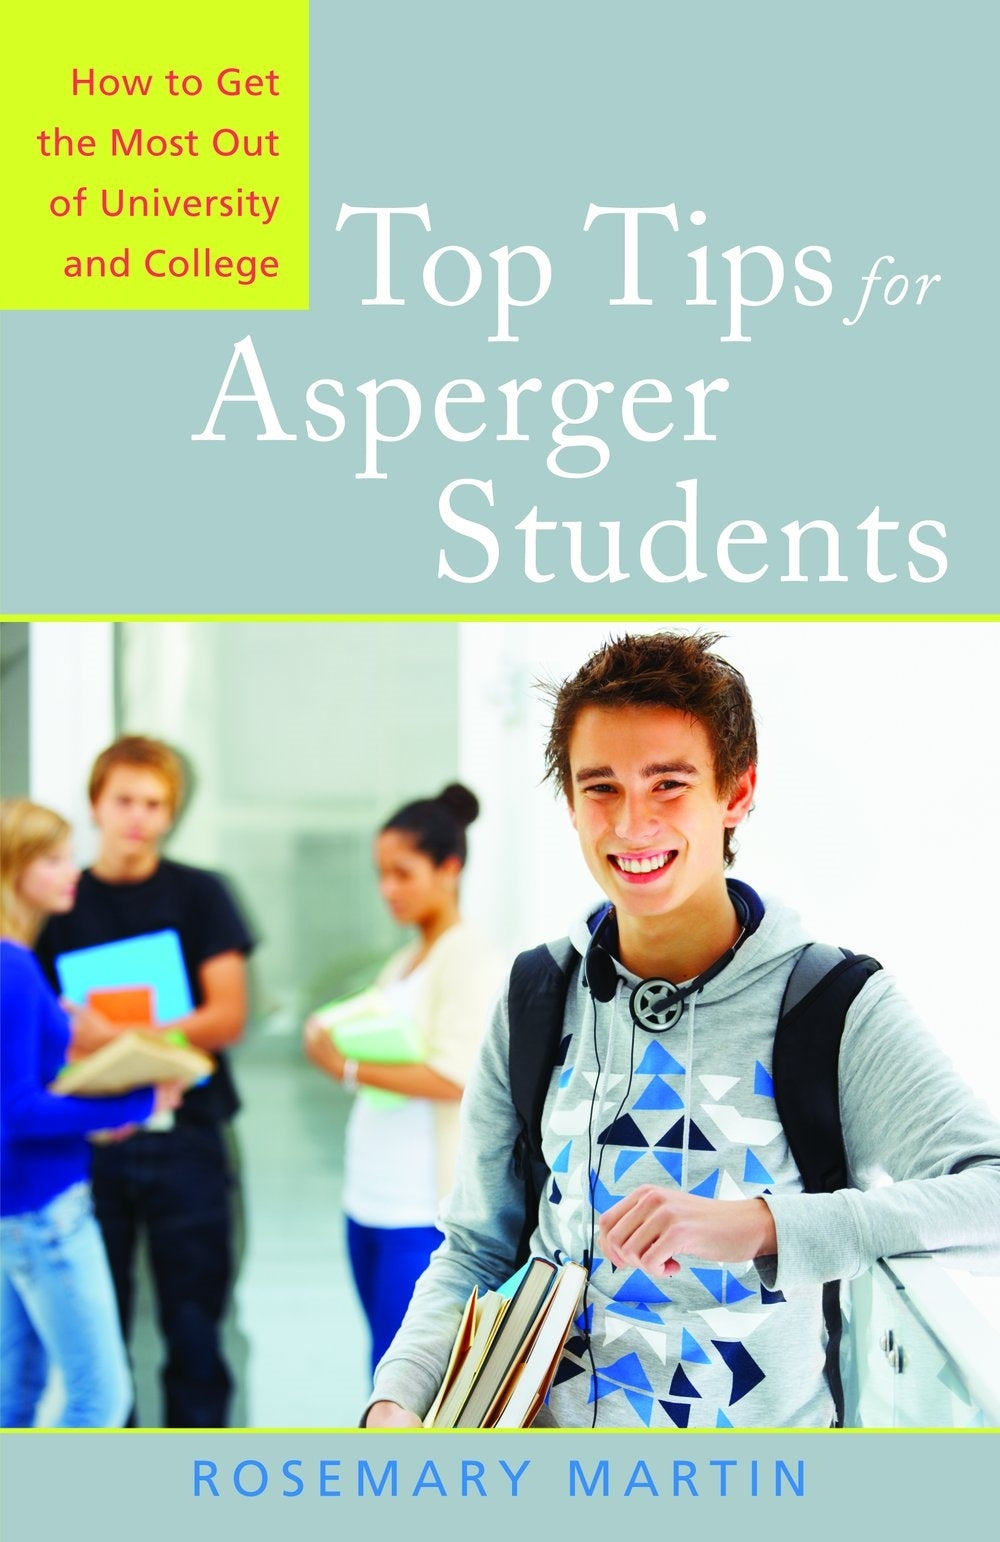 Top Tips for Asperger Students by Rosemary Martin